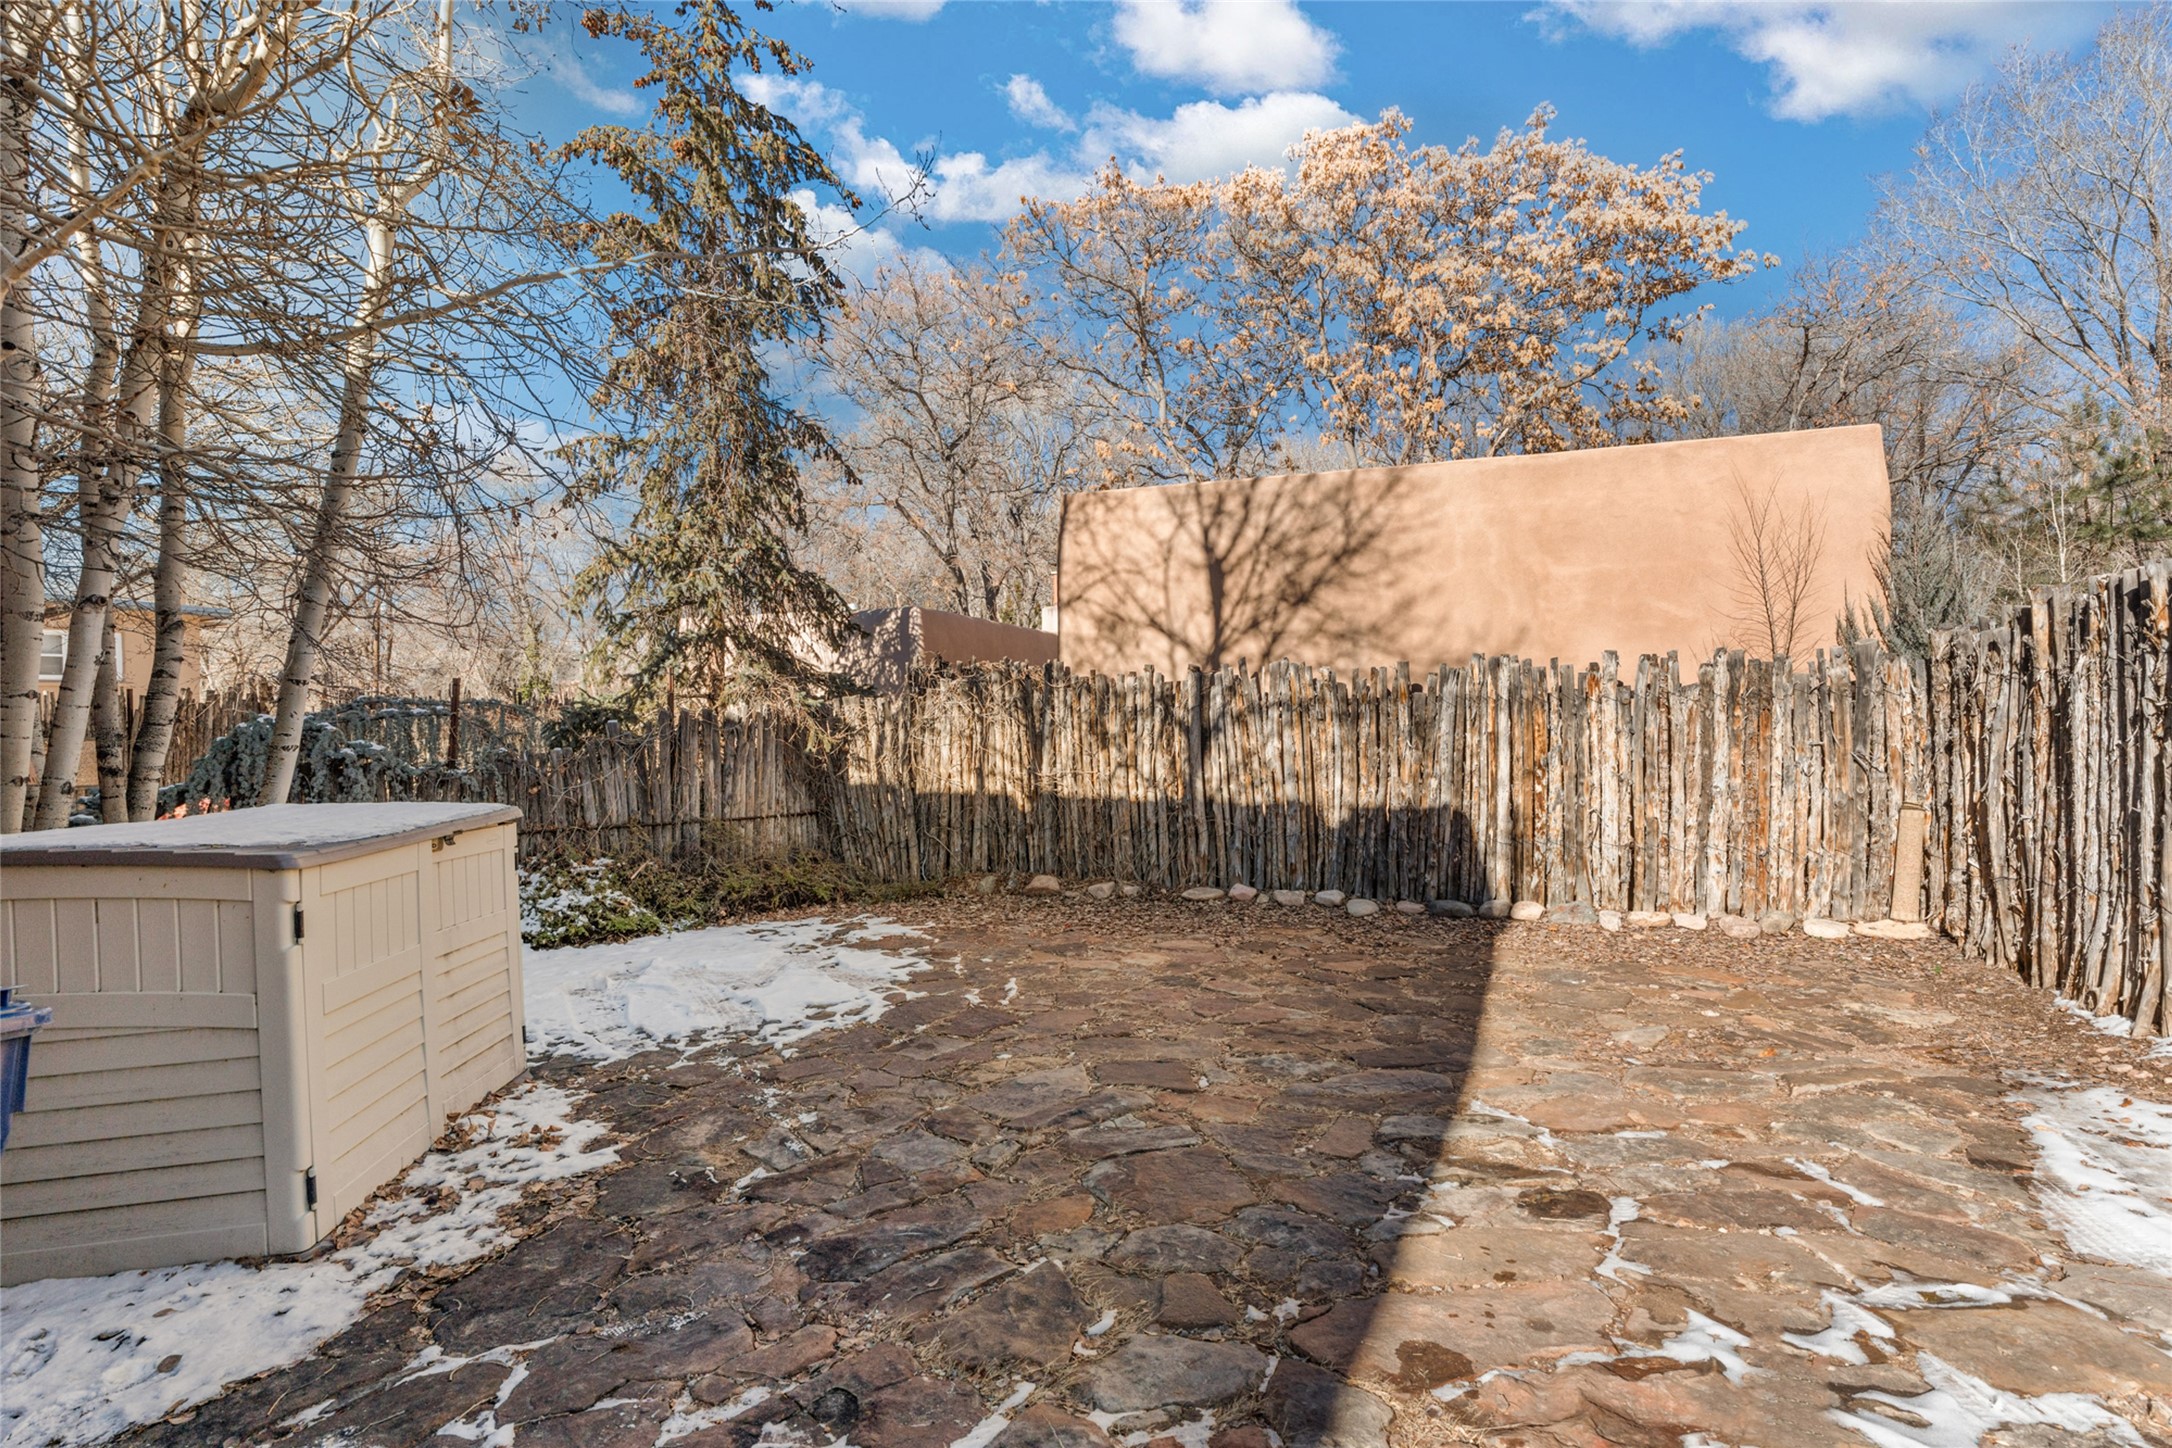 943 Canyon Road, Santa Fe, New Mexico 87501, 2 Bedrooms Bedrooms, ,2 BathroomsBathrooms,Residential,For Sale,943 Canyon Road,202400006